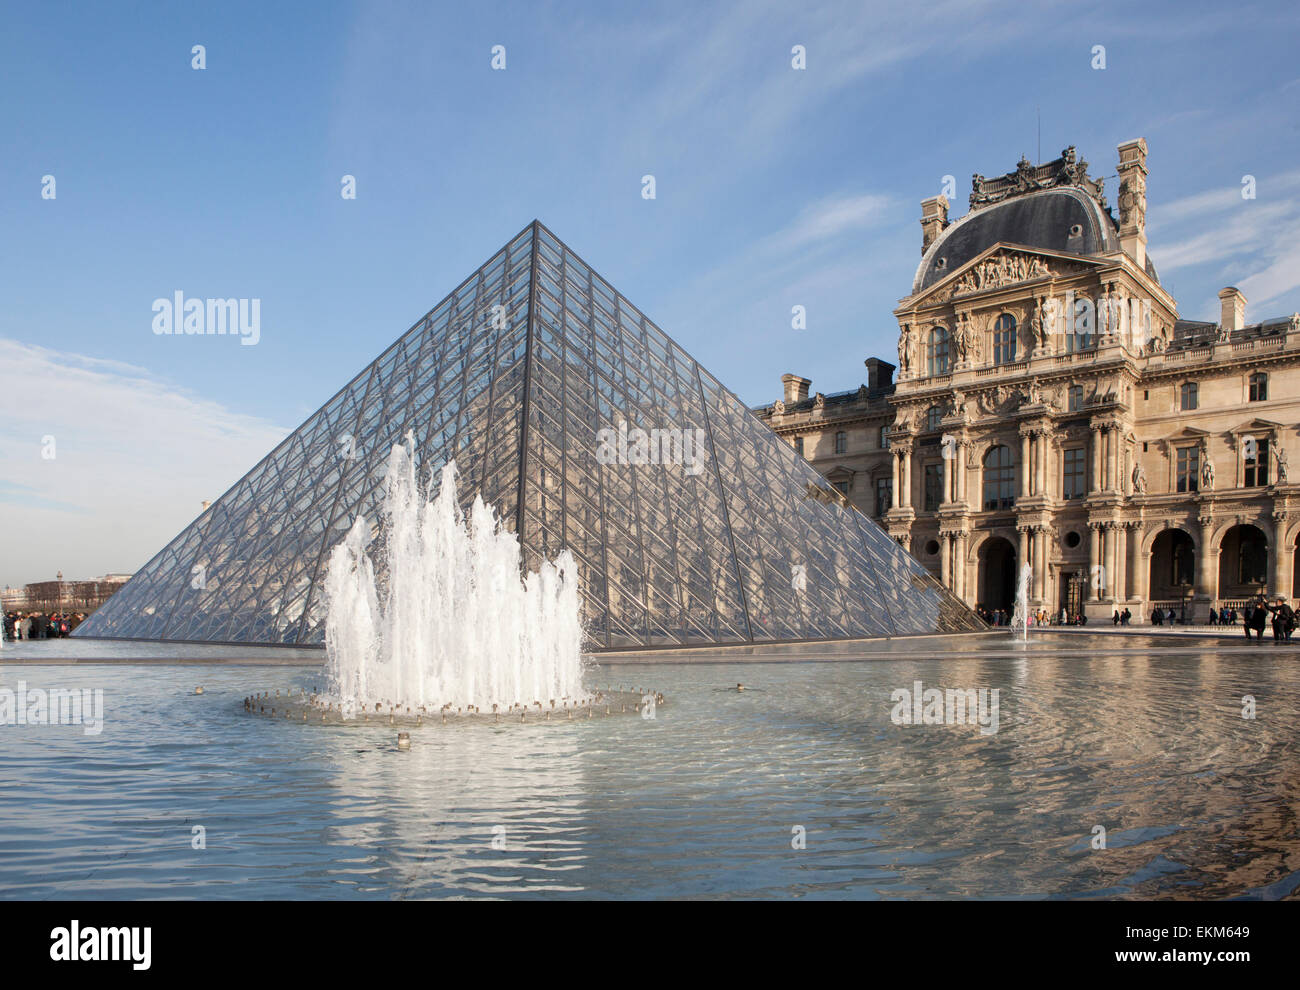 The Louvre Pyramid and Palace in Paris Stock Photo